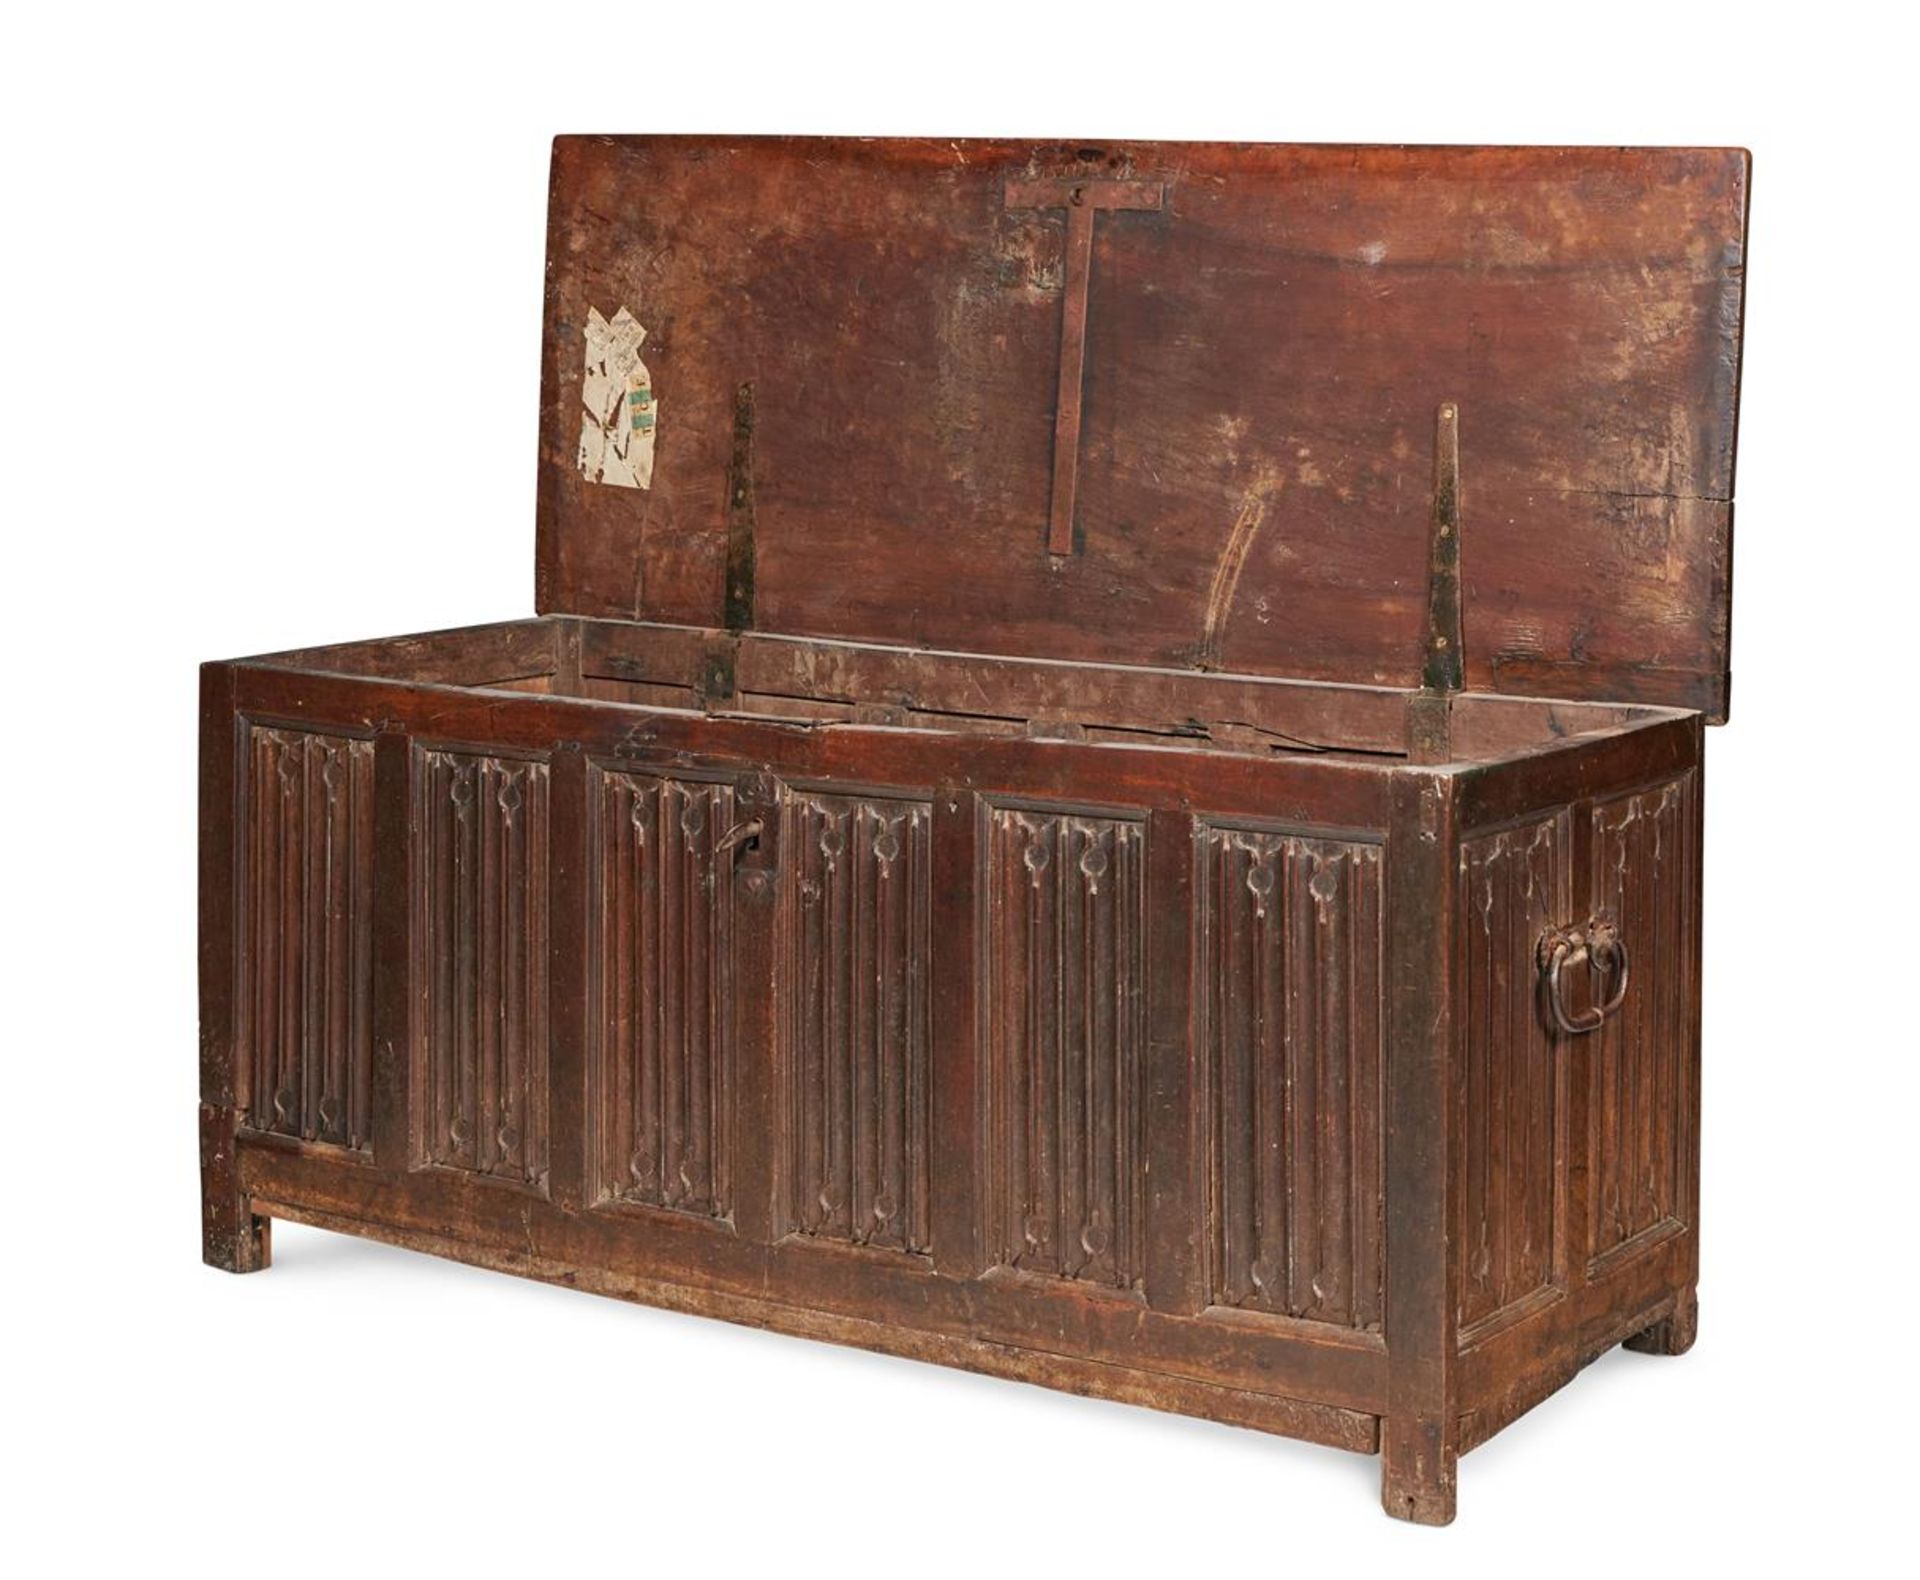 AN OAK COFFER, LATE 16TH/EARLY 17TH CENTURY - Image 2 of 4